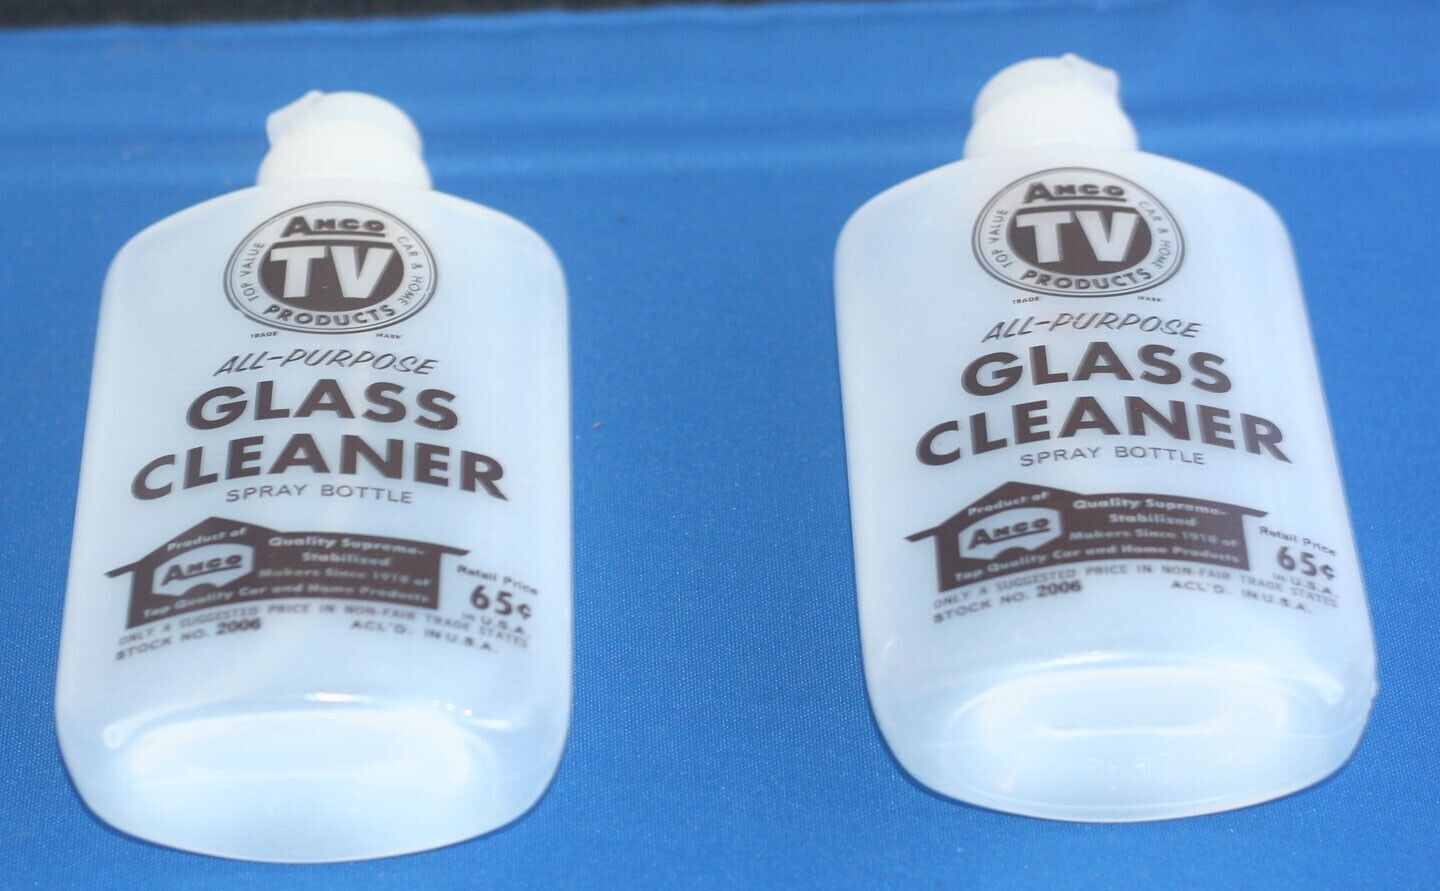 Anco Glass Cleaner Bottles - New Old Stock (NOS) - Lot of 2 - RARE FIND WoW